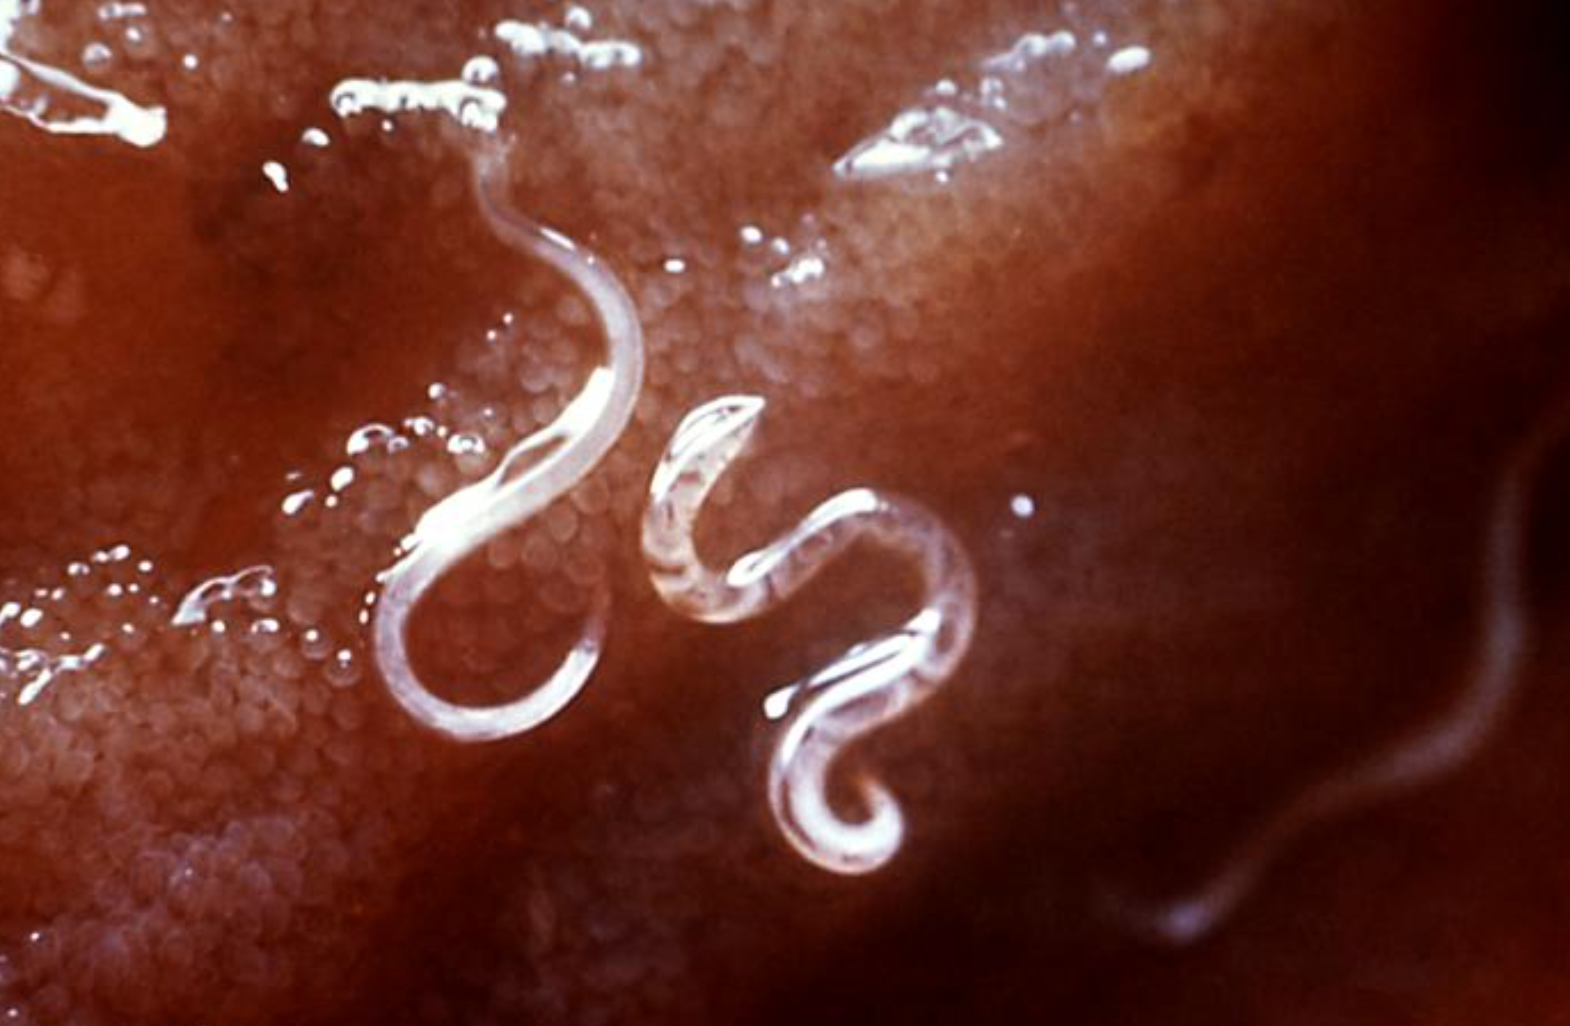 Image of A. caninum courtesy of the CDC